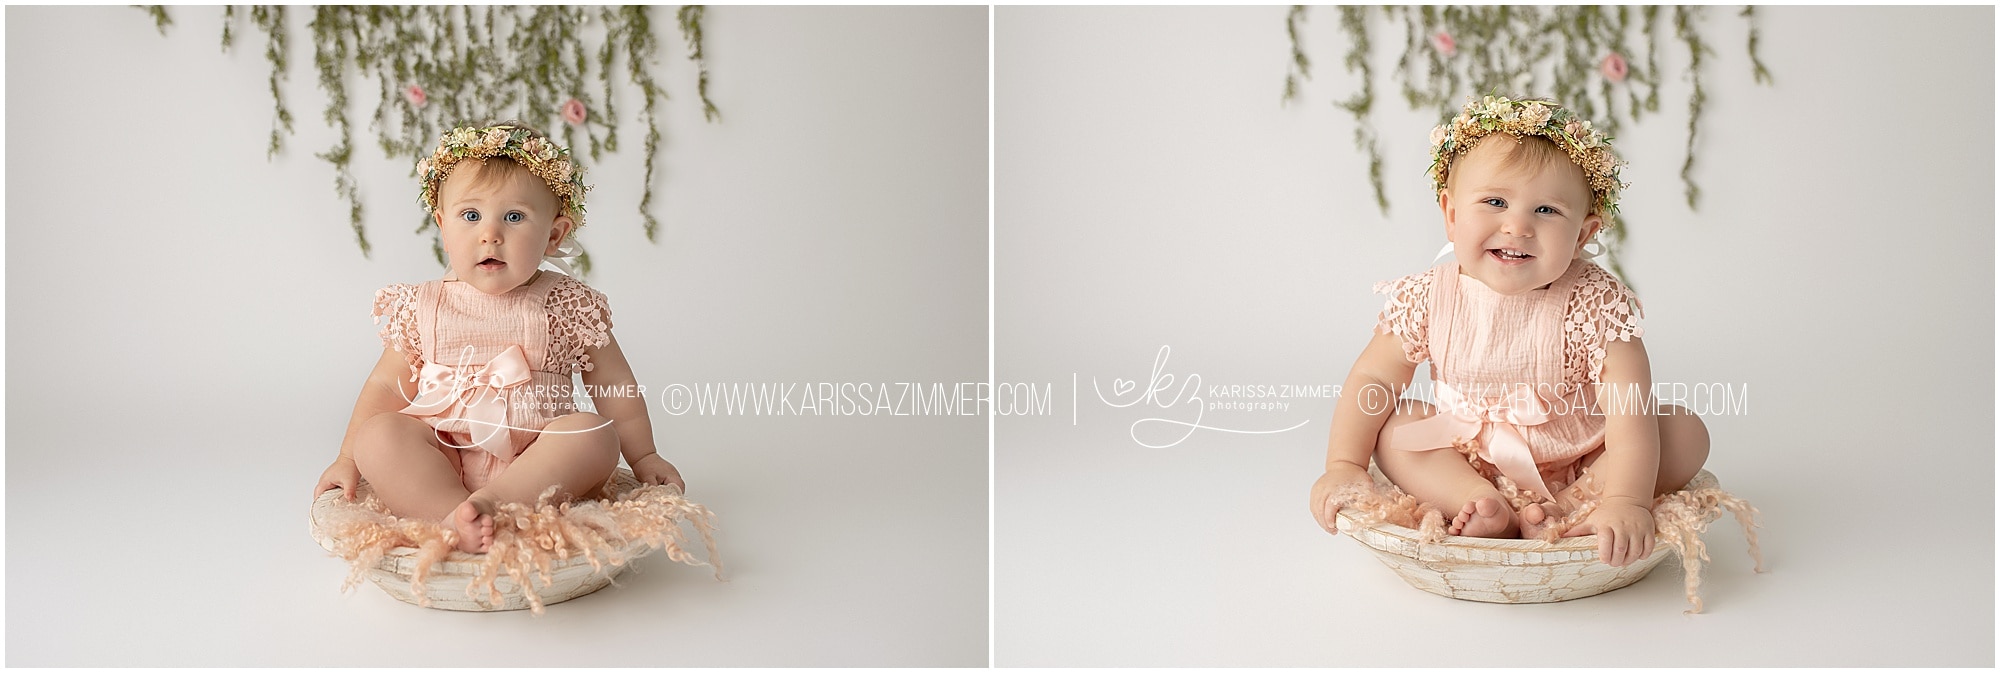 Baby's First Birthday Photo session by Karissa Zimmer Photography in Camp Hill PA